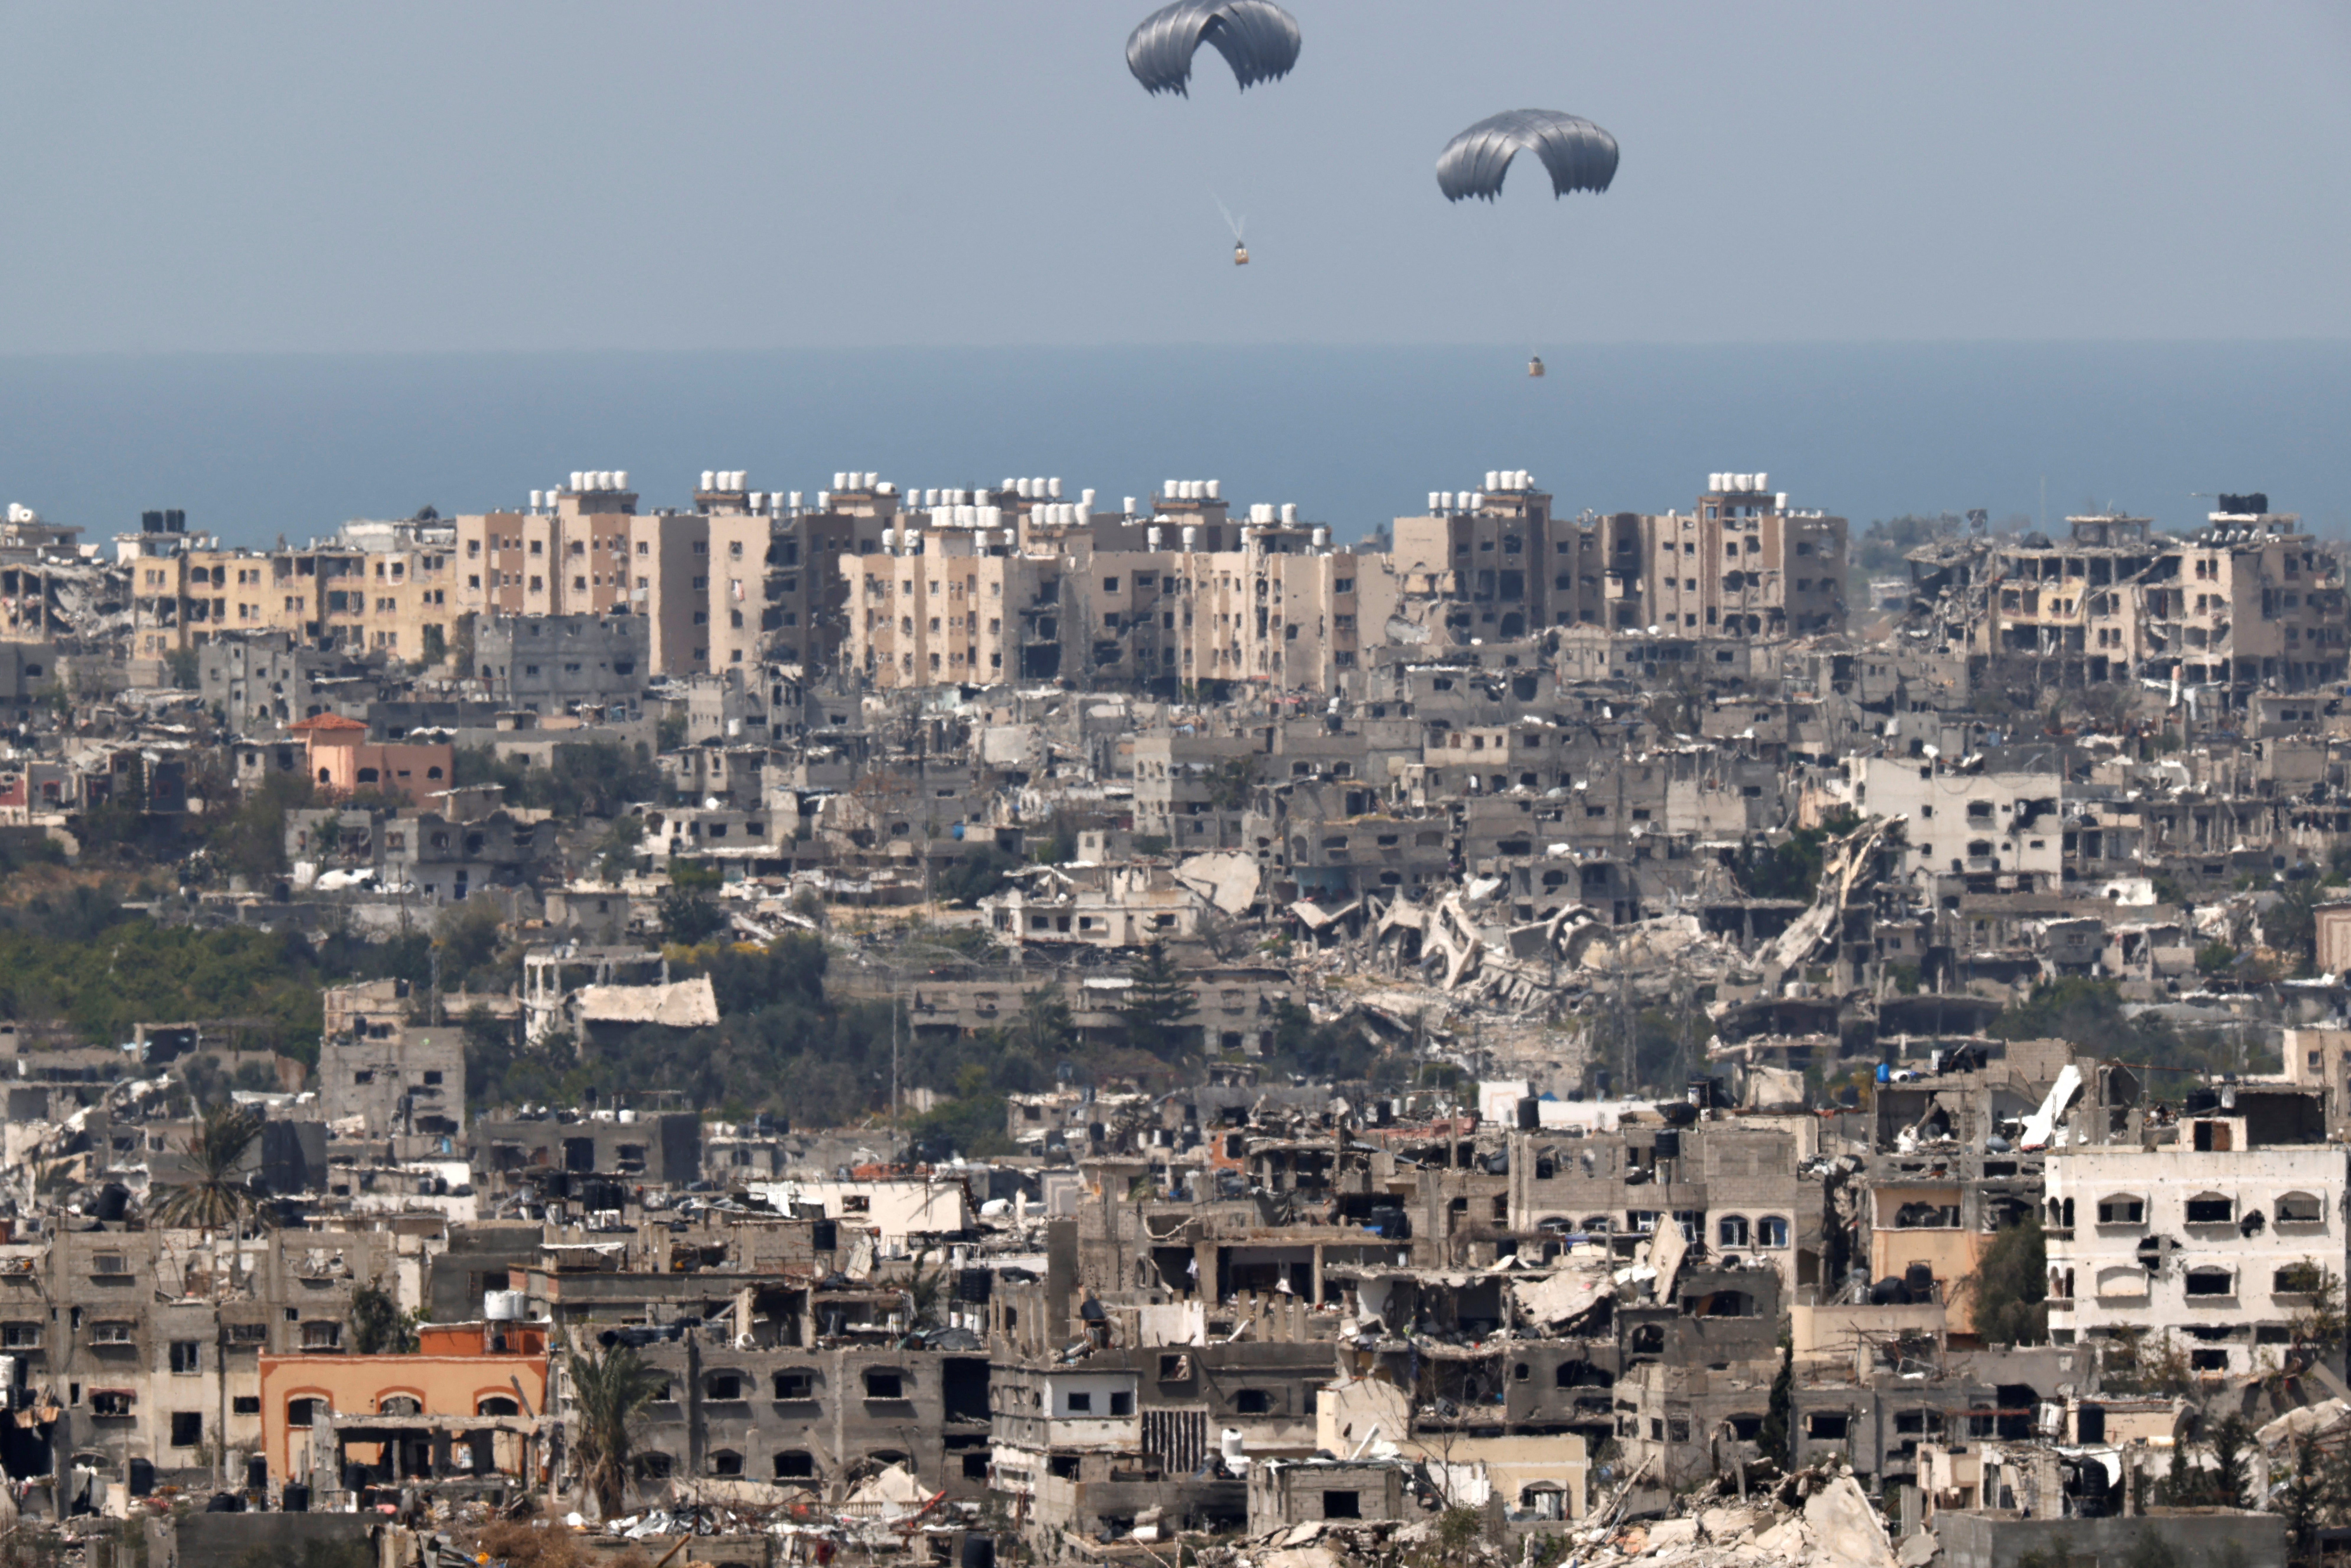 Humanitarian aid falls through the sky towards the Gaza Strip after being dropped from an aircraft